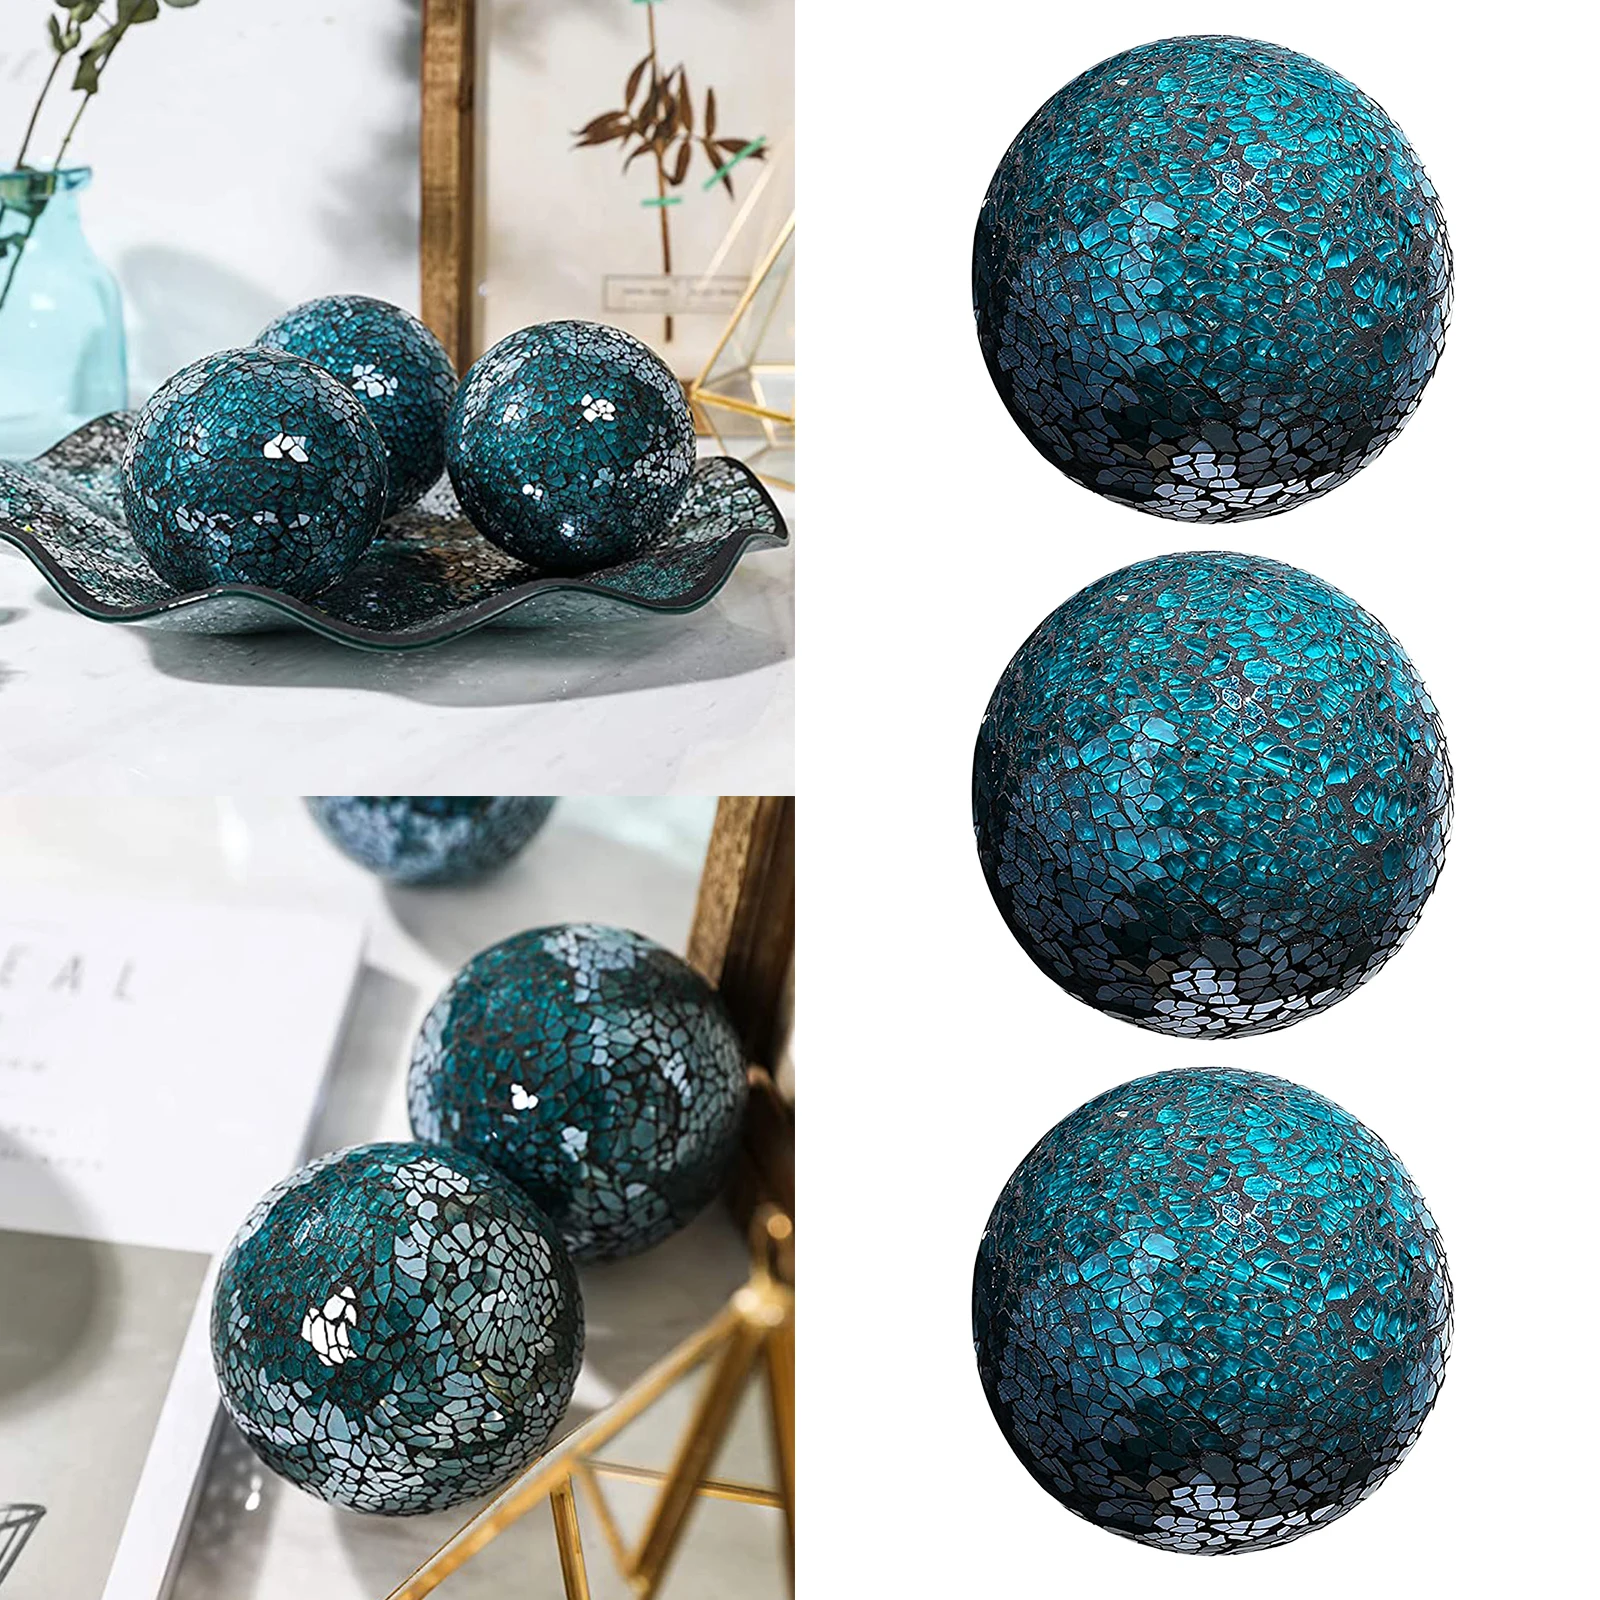 3pcs Decorative Glass Mosaic Mirror Balls 10cm Home Sphere Ball Ornaments for Living Room Table Centerpiece Decorations